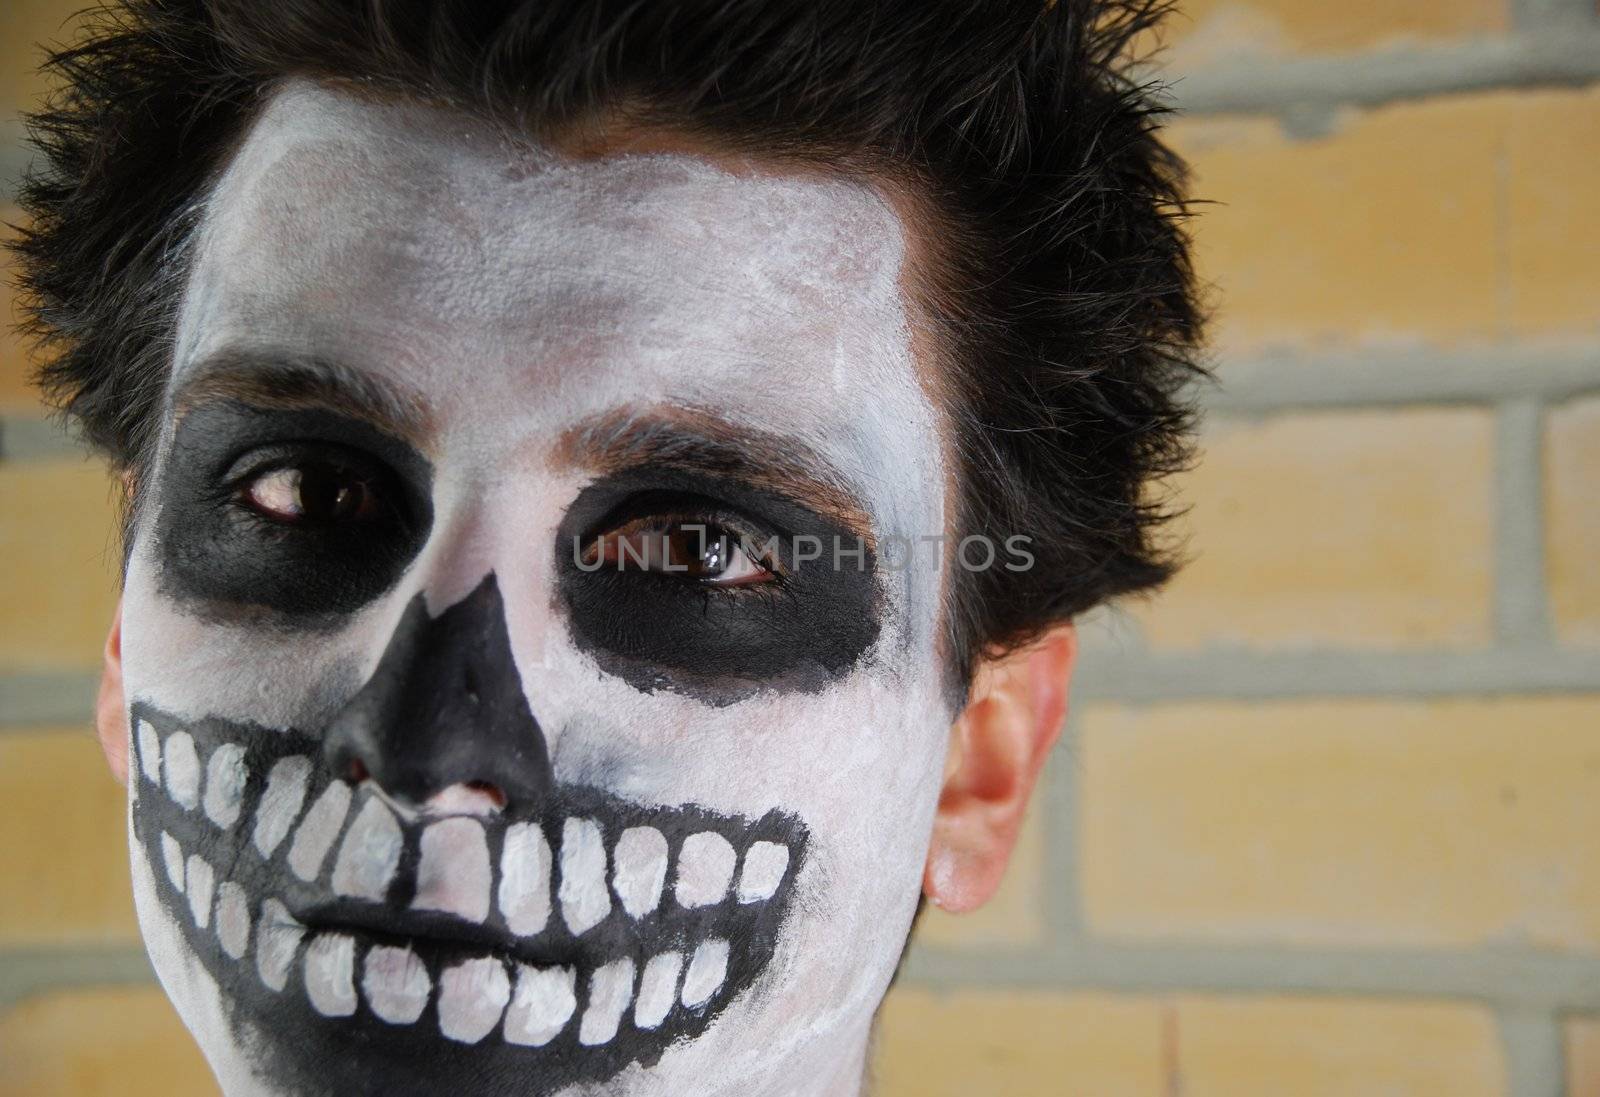 portrait of a creepy skeleton guy perfect for Carnival (brick wall background)